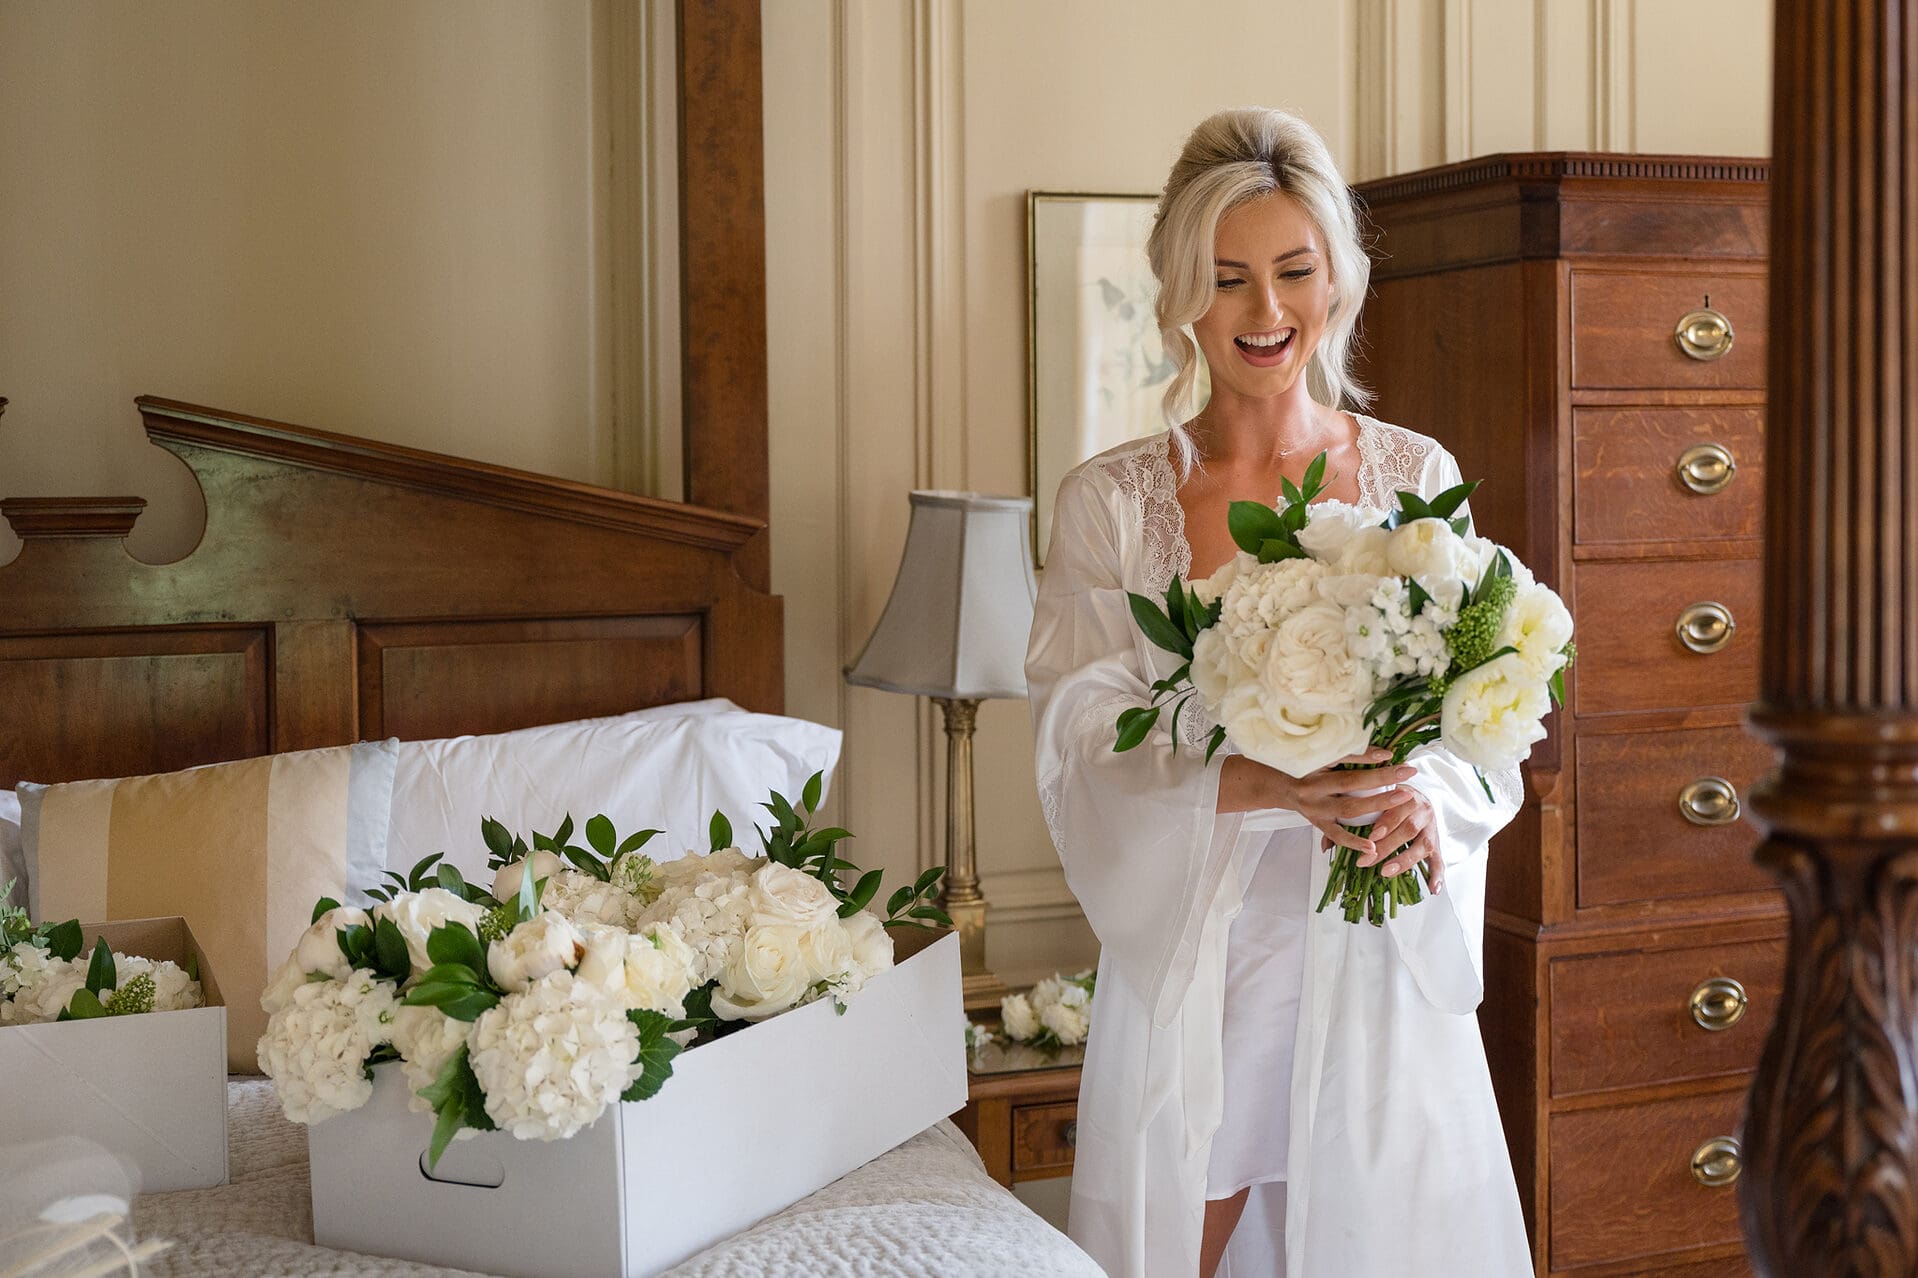 Bride wearing a white robe and admiring her wedding bouquet